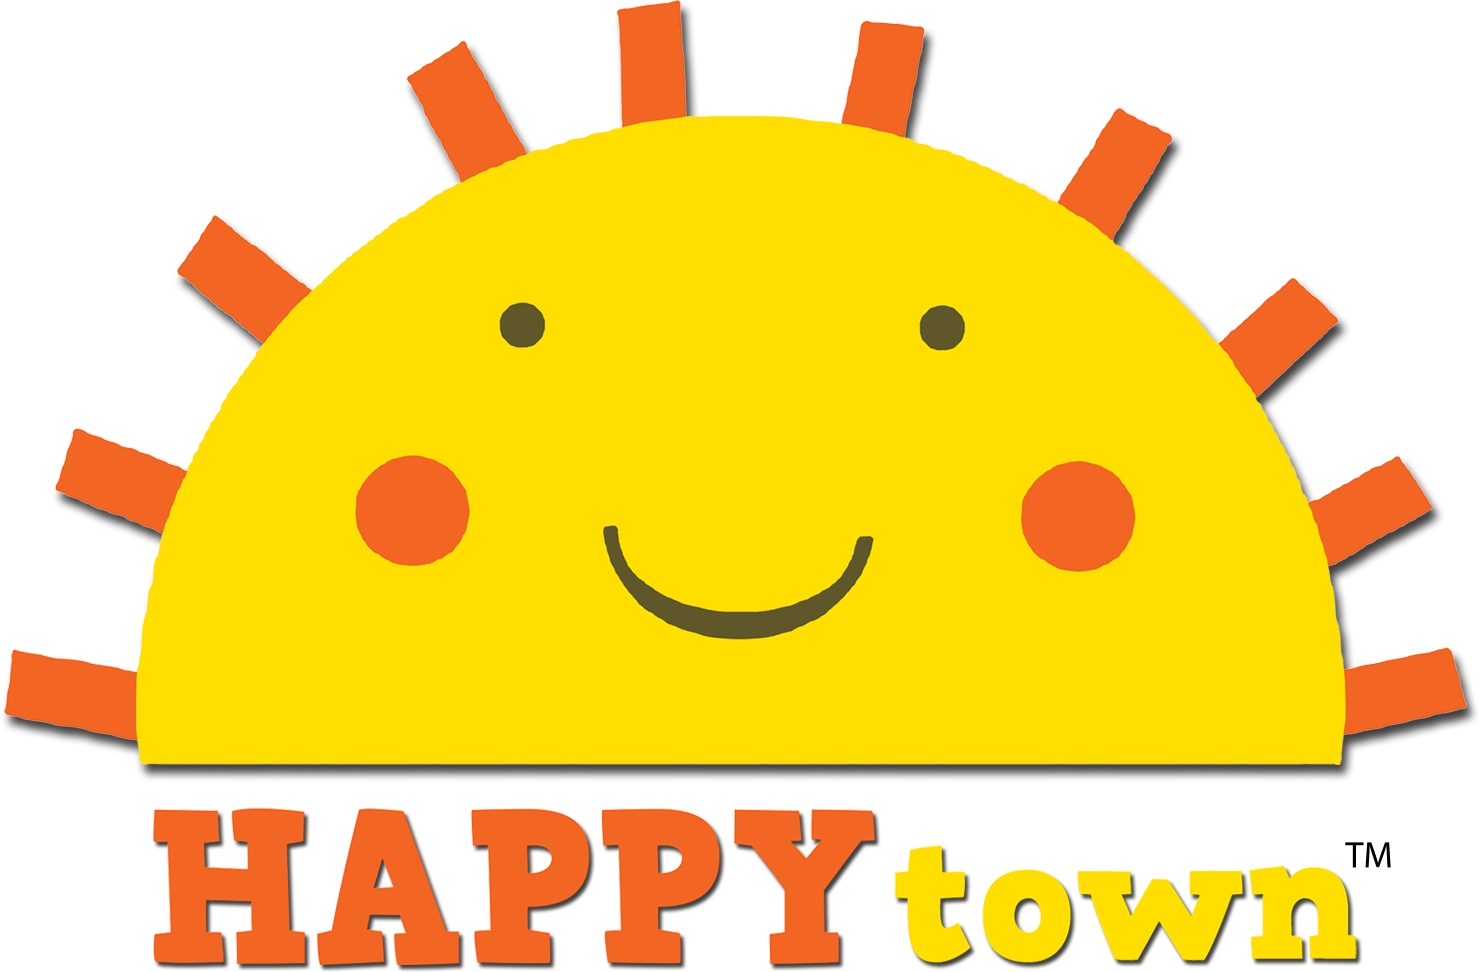 Welcome to HAPPYtown!